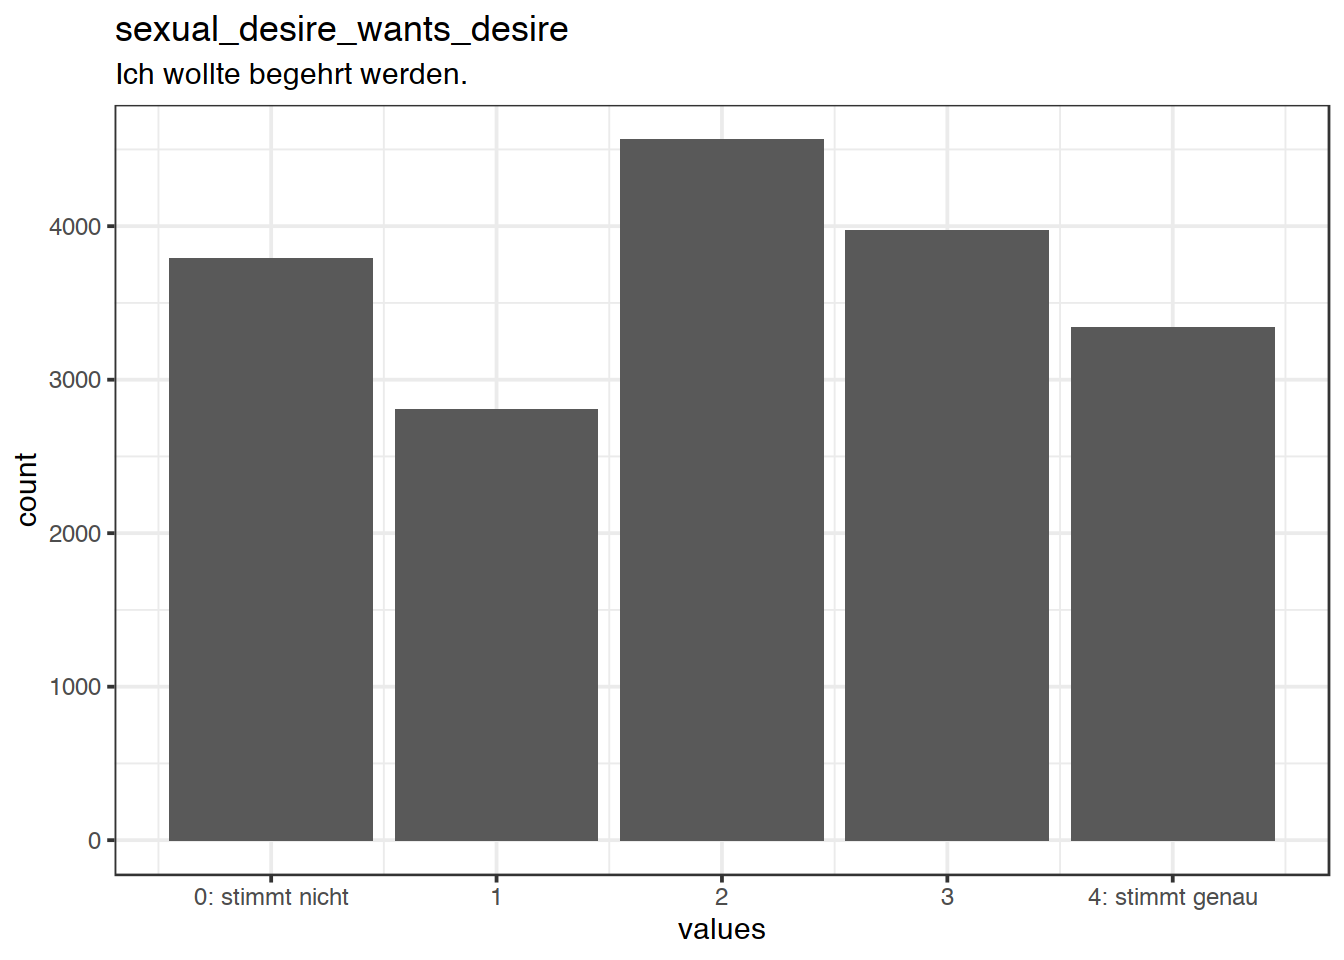 Distribution of values for sexual_desire_wants_desire